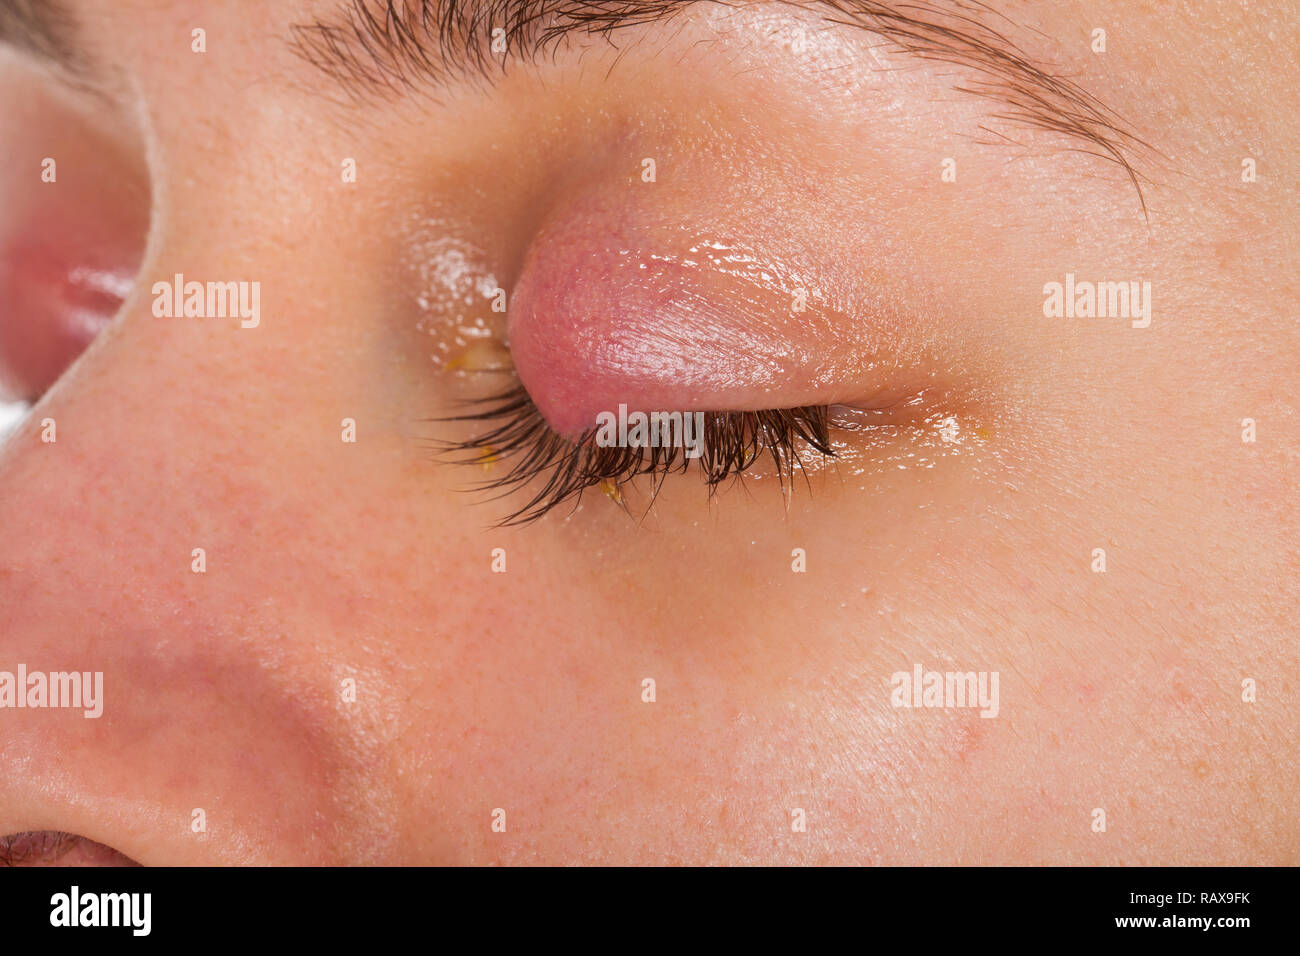 Close up picture of upper eyelid inflammation - chalazion - young female suffering from viral infection Stock Photo